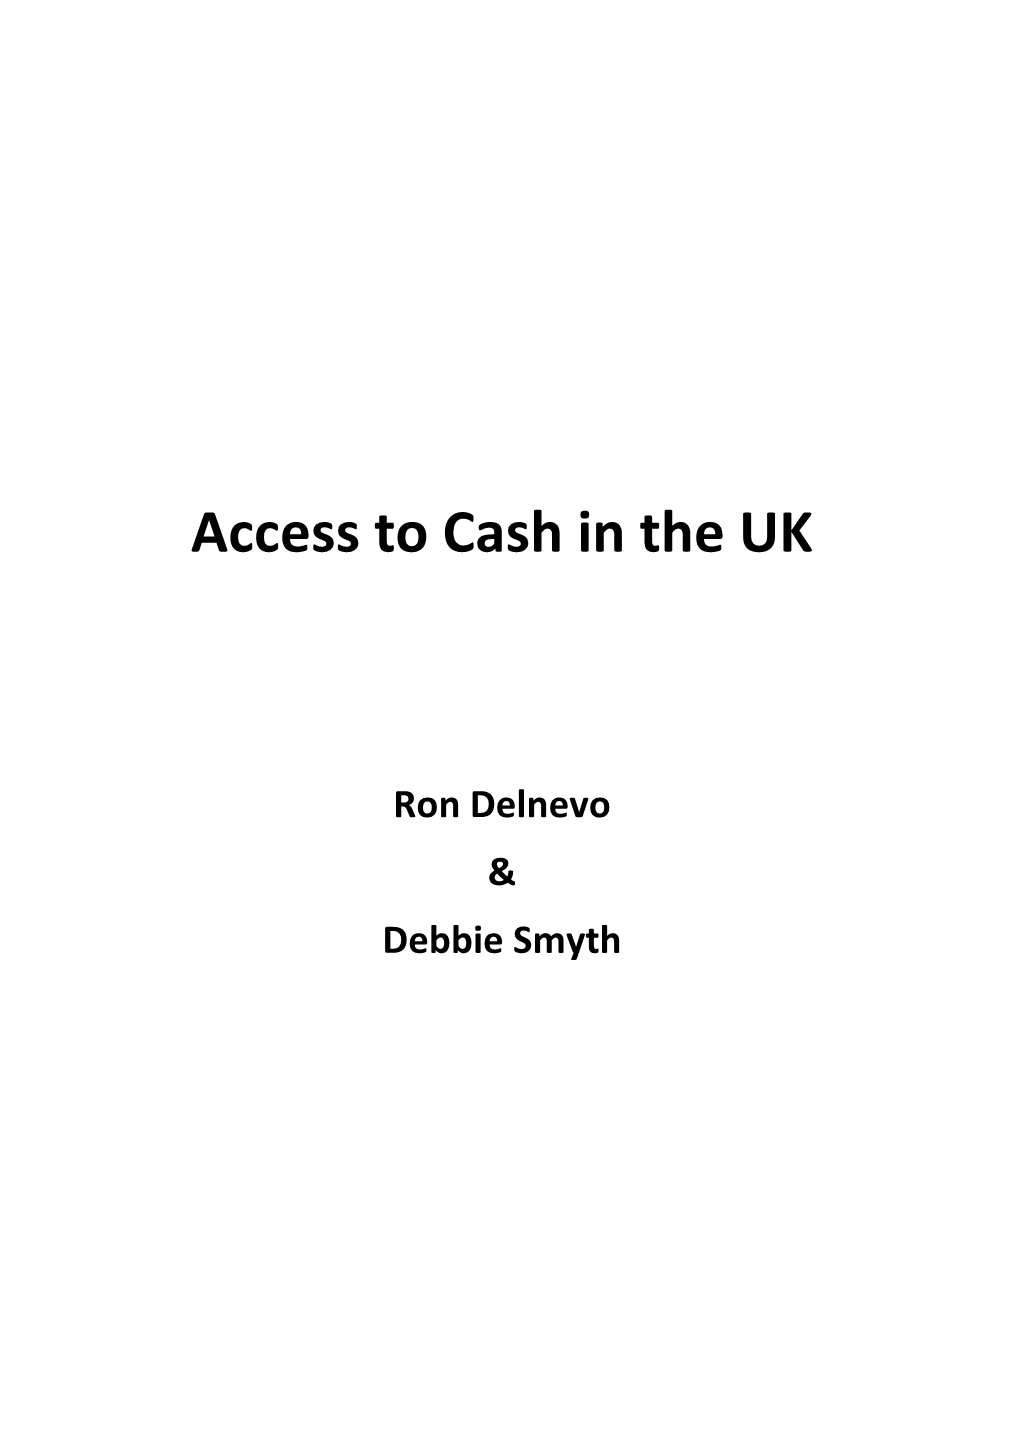 Access to Cash in the UK